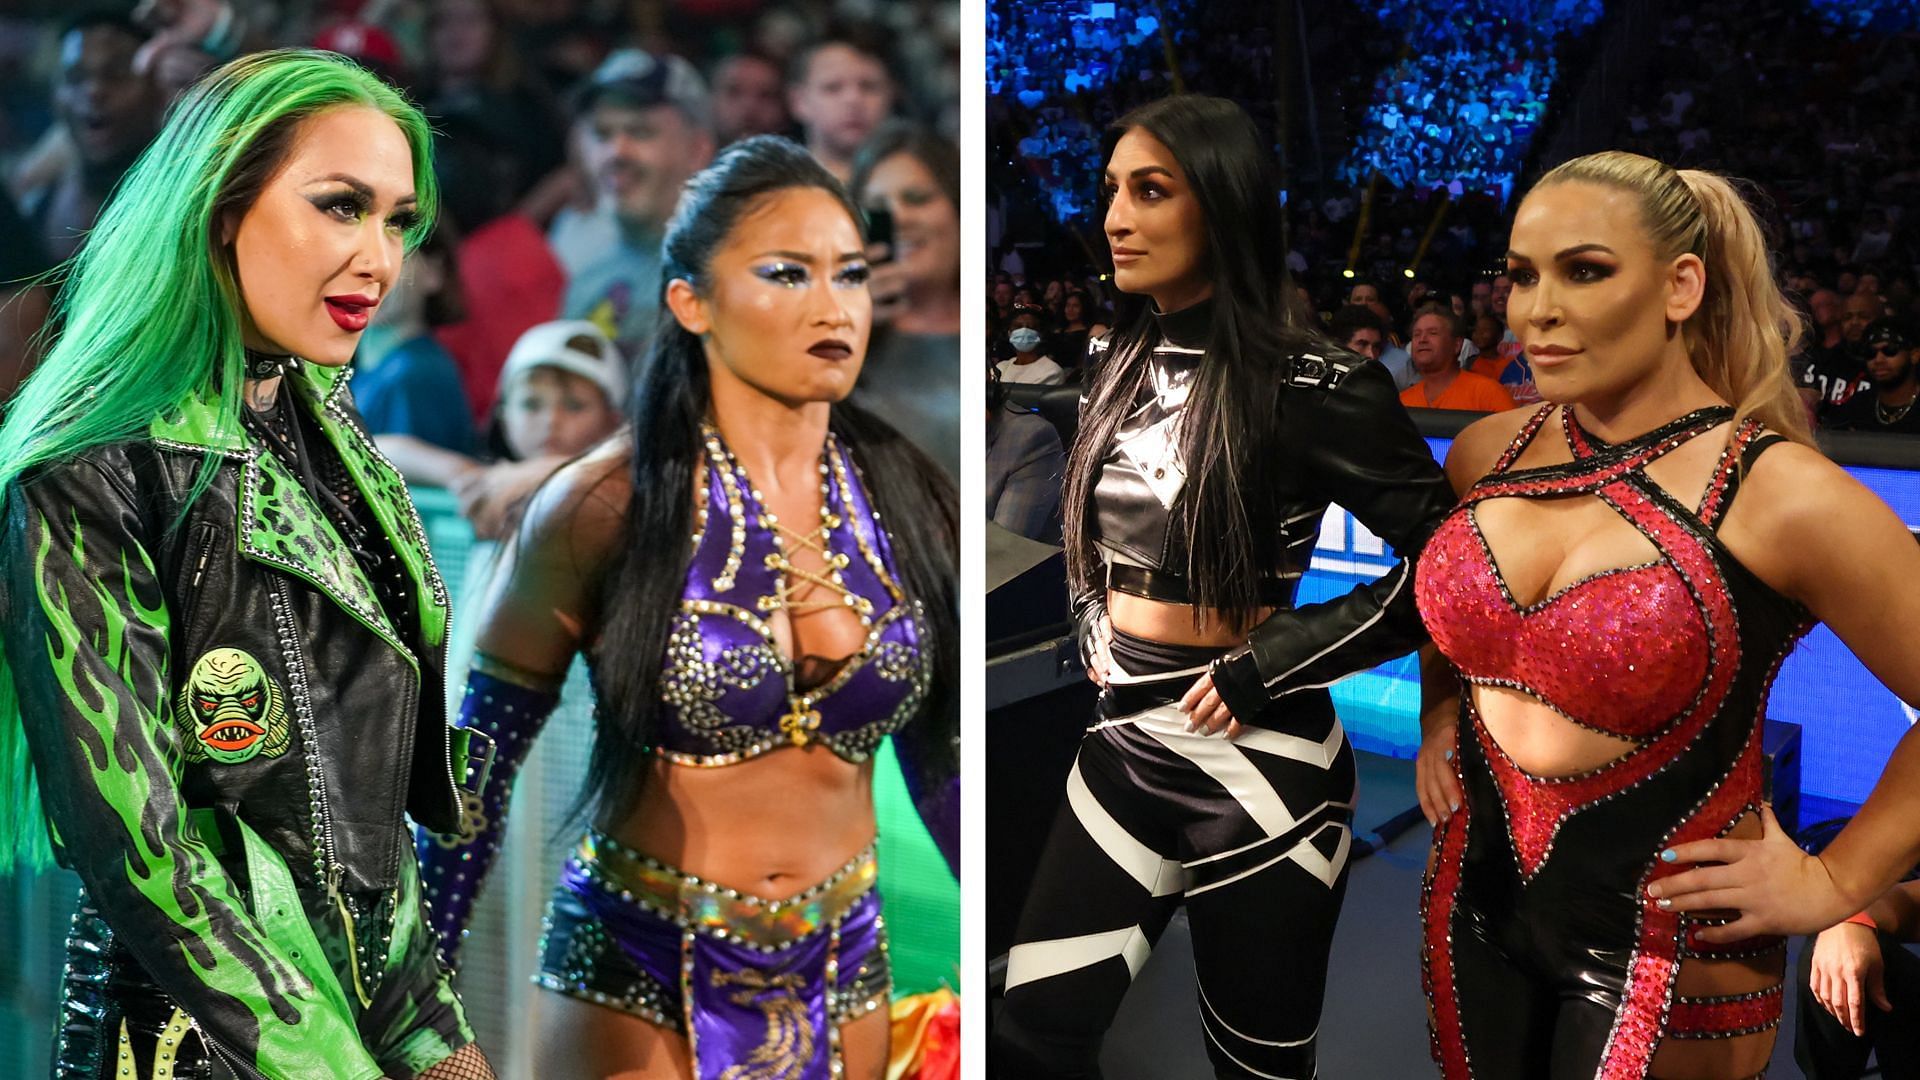 Four teams are set to clash on WWE SmackDown as part of the Women